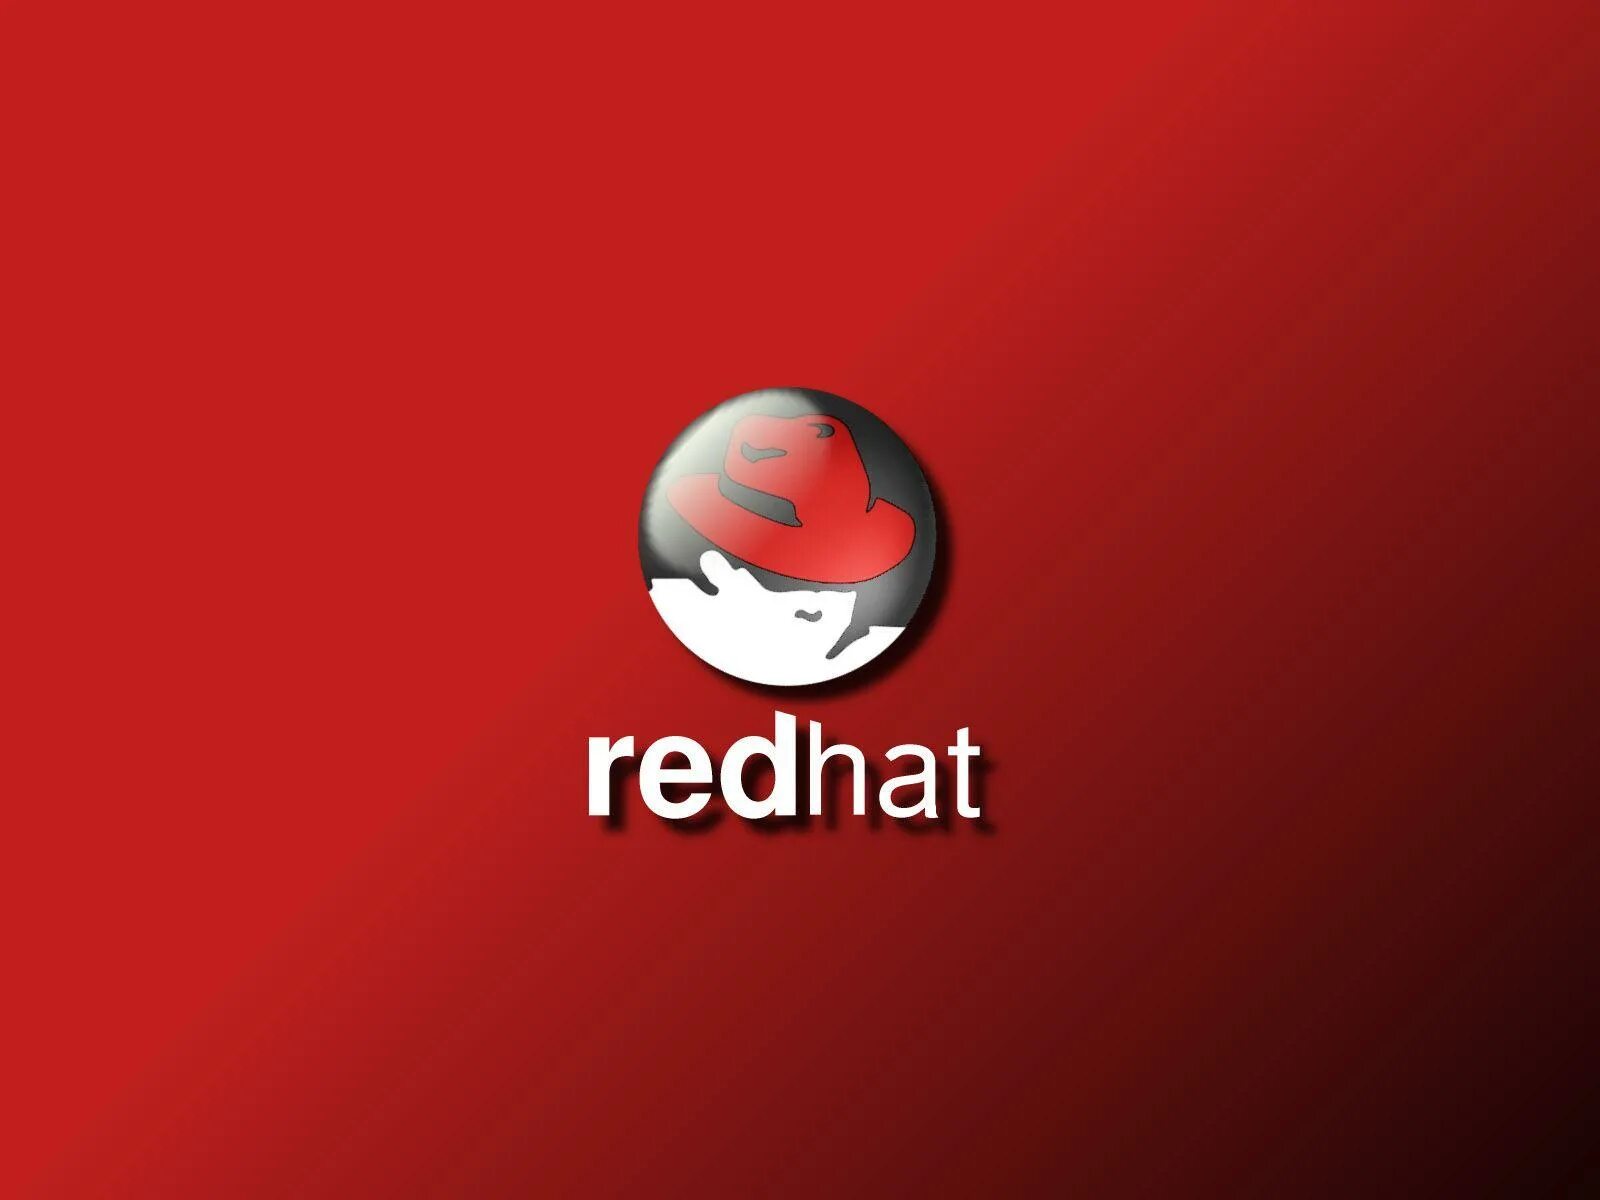 Линукс Red hat. Red hat Enterprise Linux 7. Red hat Enterprise Linux. Red hat Enterprise Linux логотип. Red hat 7